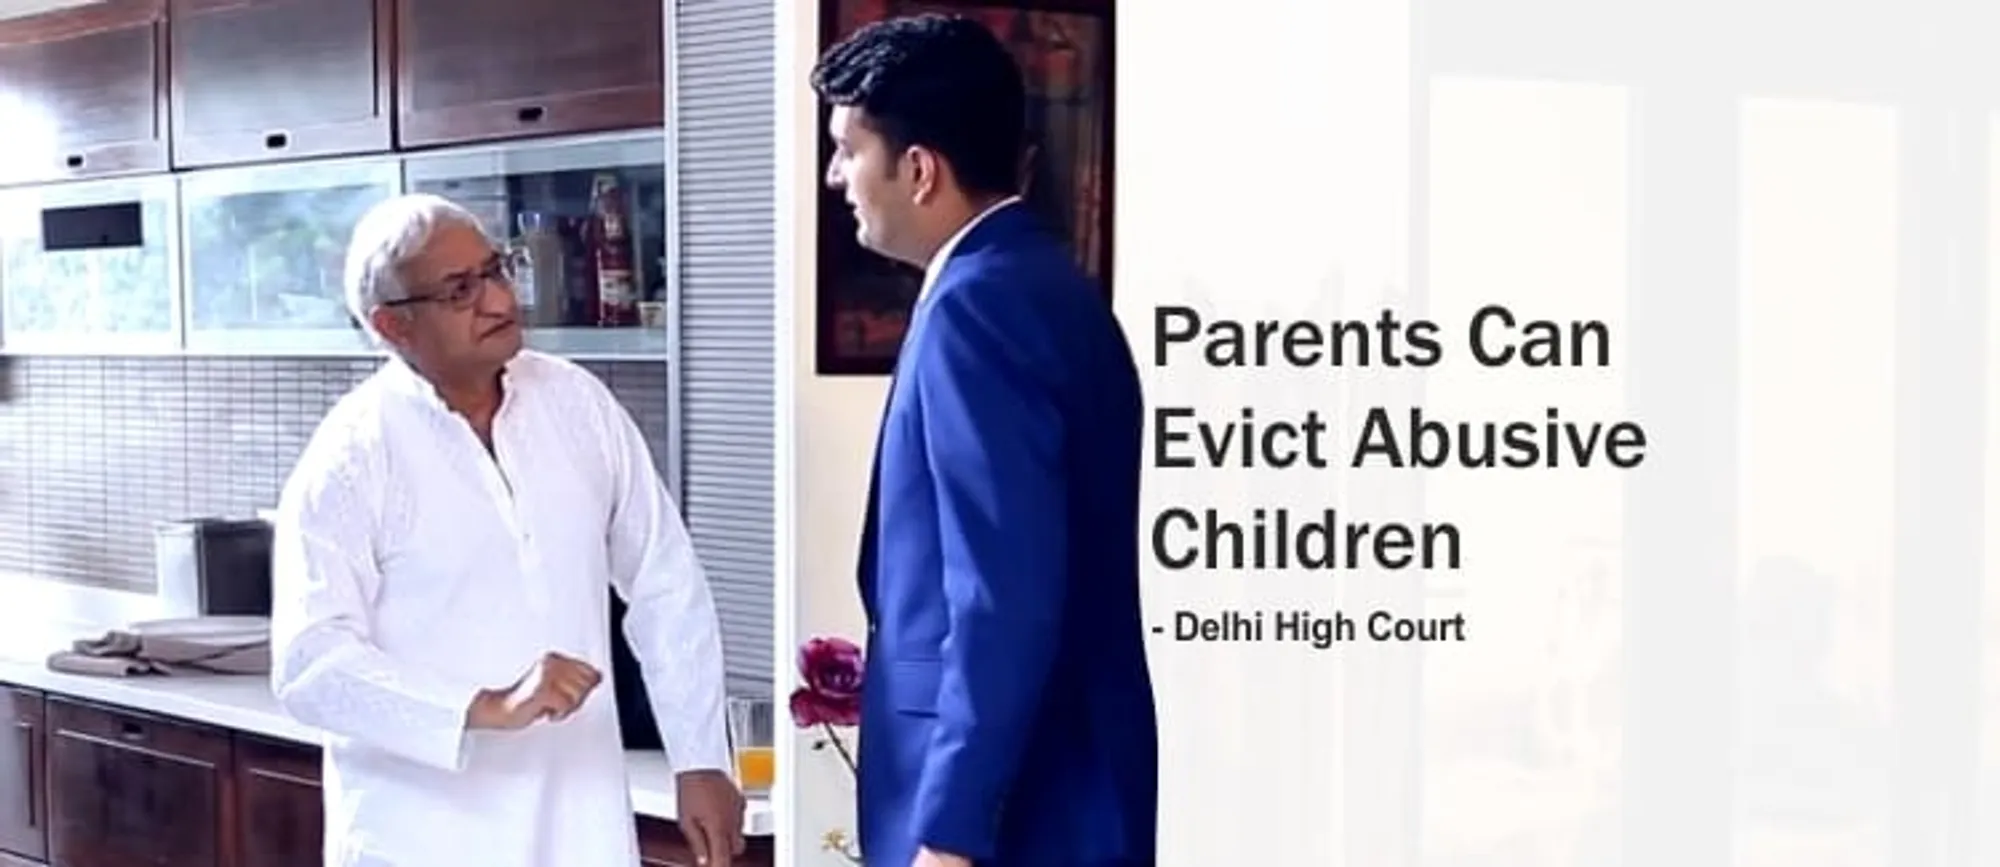 Parents Can Evict Abusive Children from Home: Delhi High Court (Judgement)